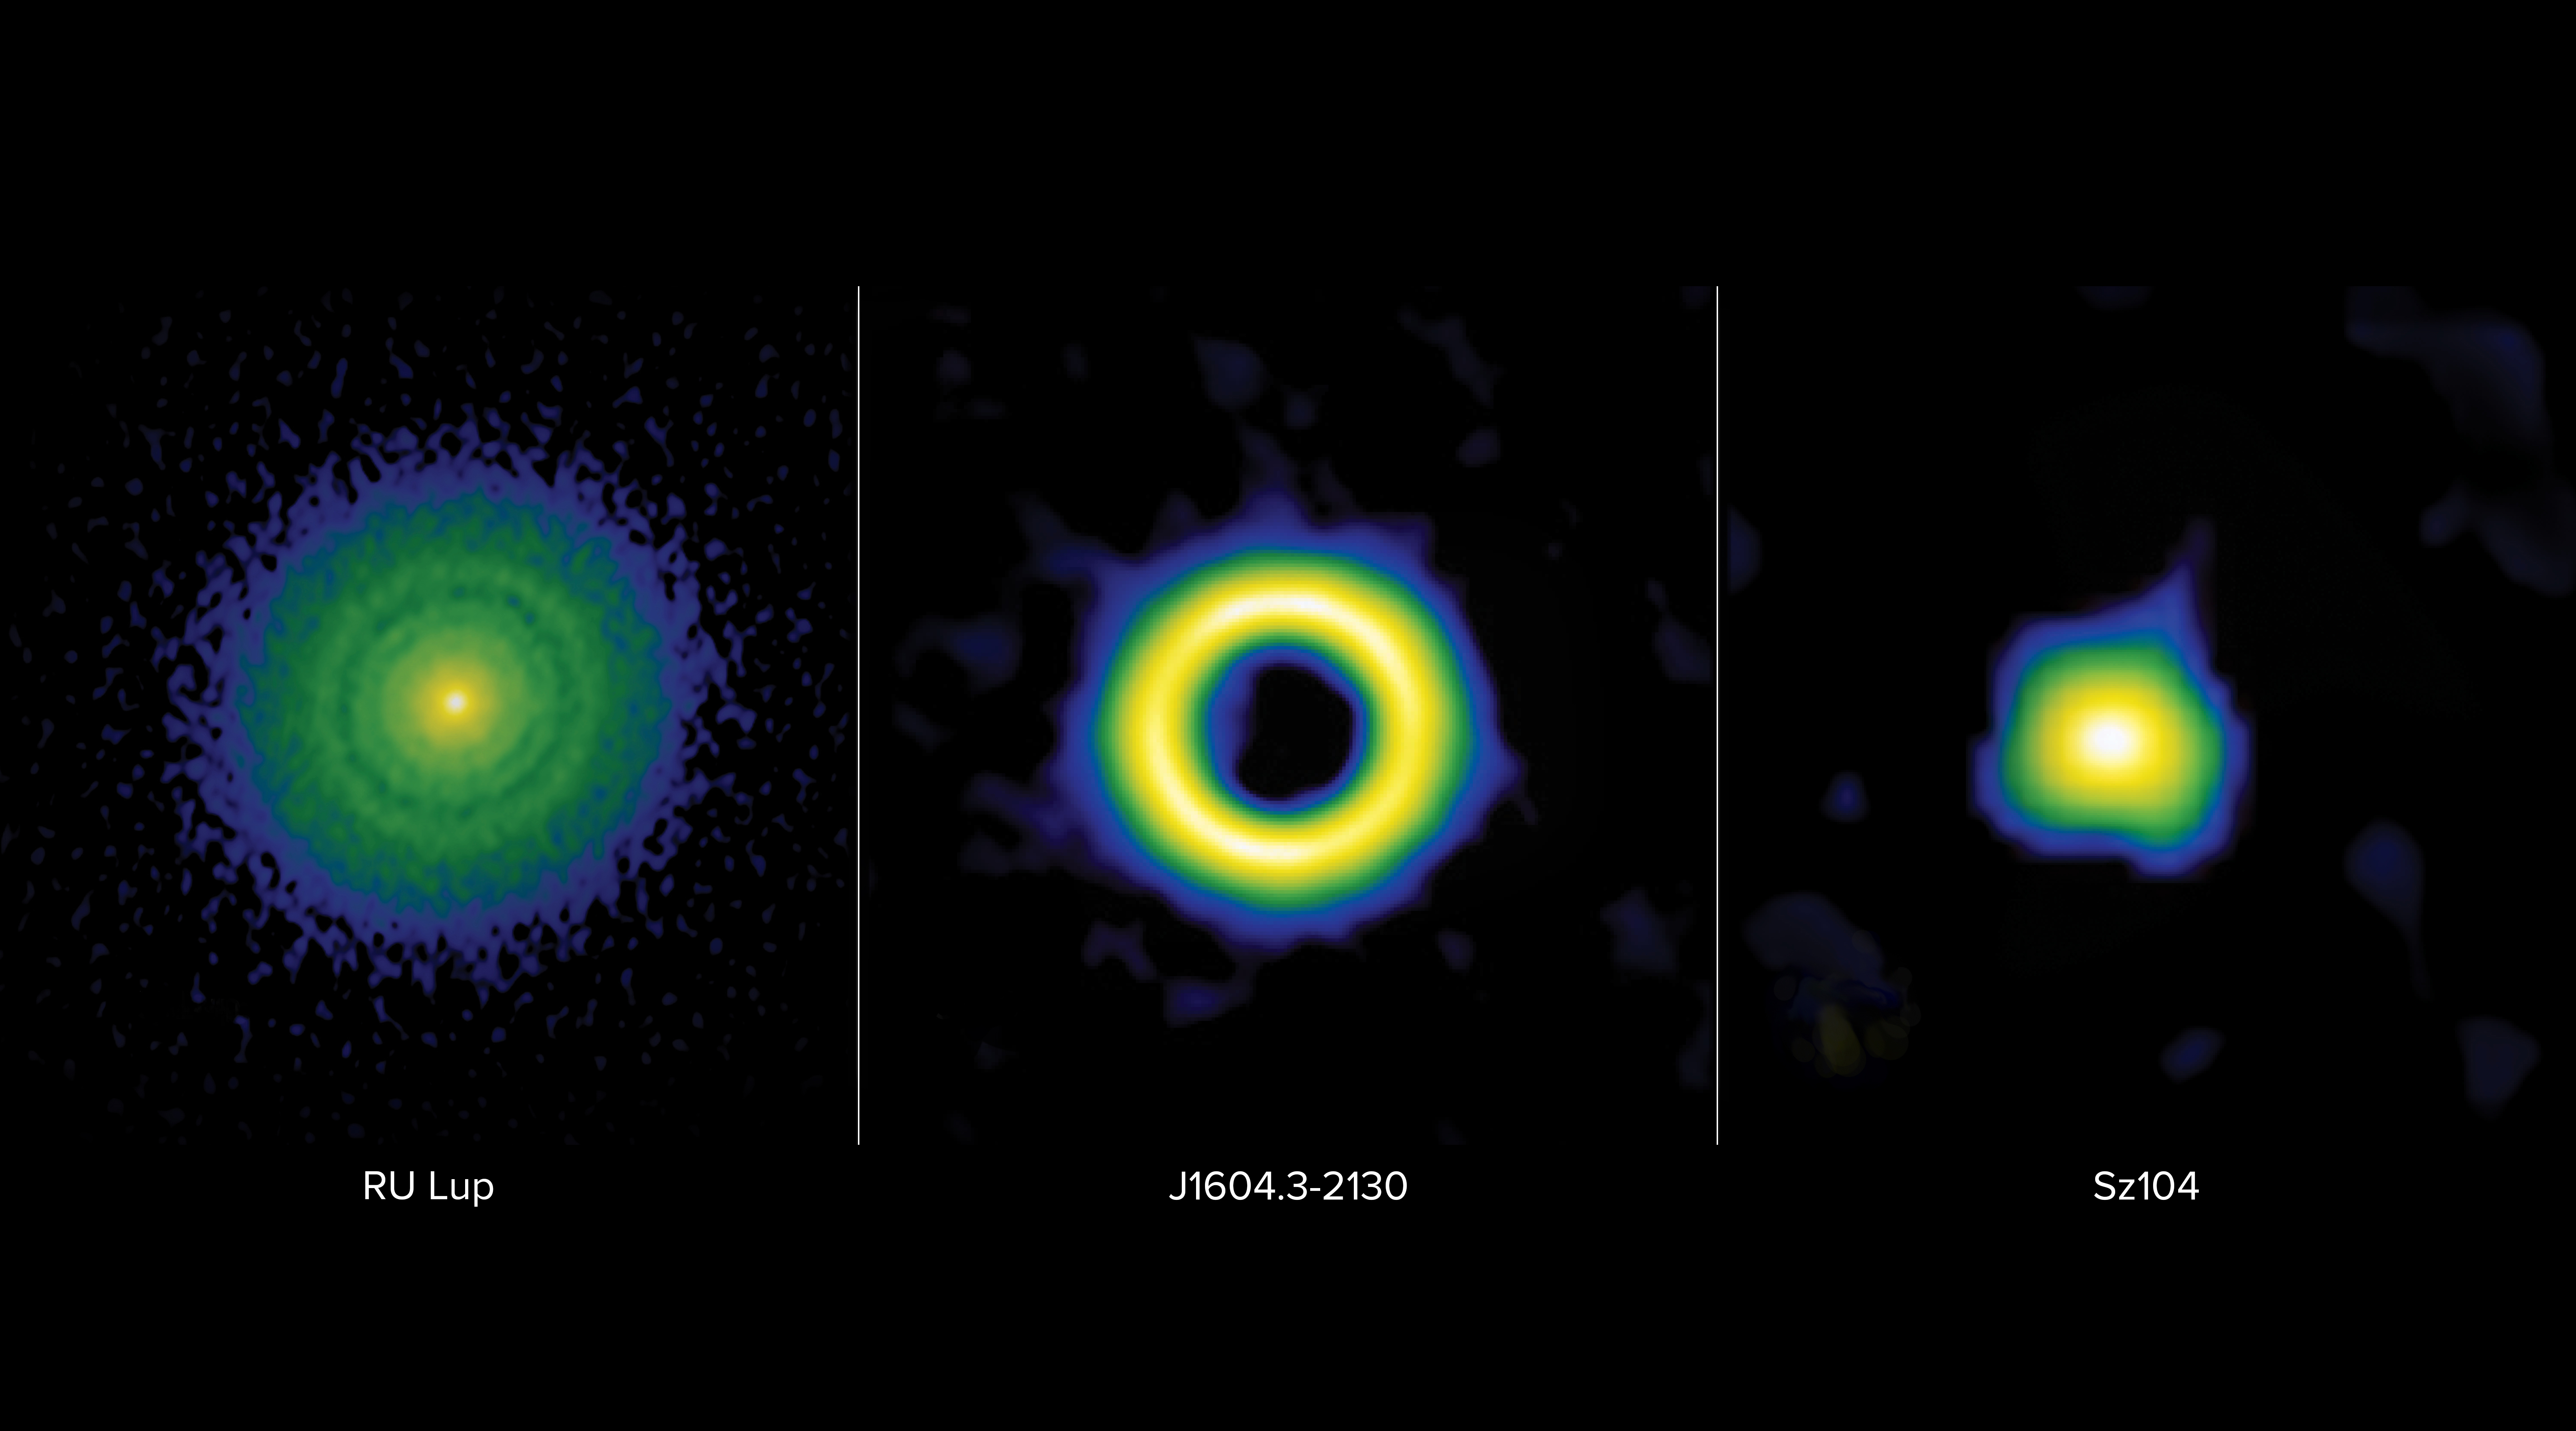 False color image of protoplanetary disks side by side. Left is a ring disk showing blue scattered outer ring, green inner rings with gaps, and a yellow core. Center is a transition disk with a thin outer blue ring and thin green and yellow rings, and a large empty cavity in the center. Right is a compact small disk with thin blue and green rings, and a large inner yellow core with no gaps.